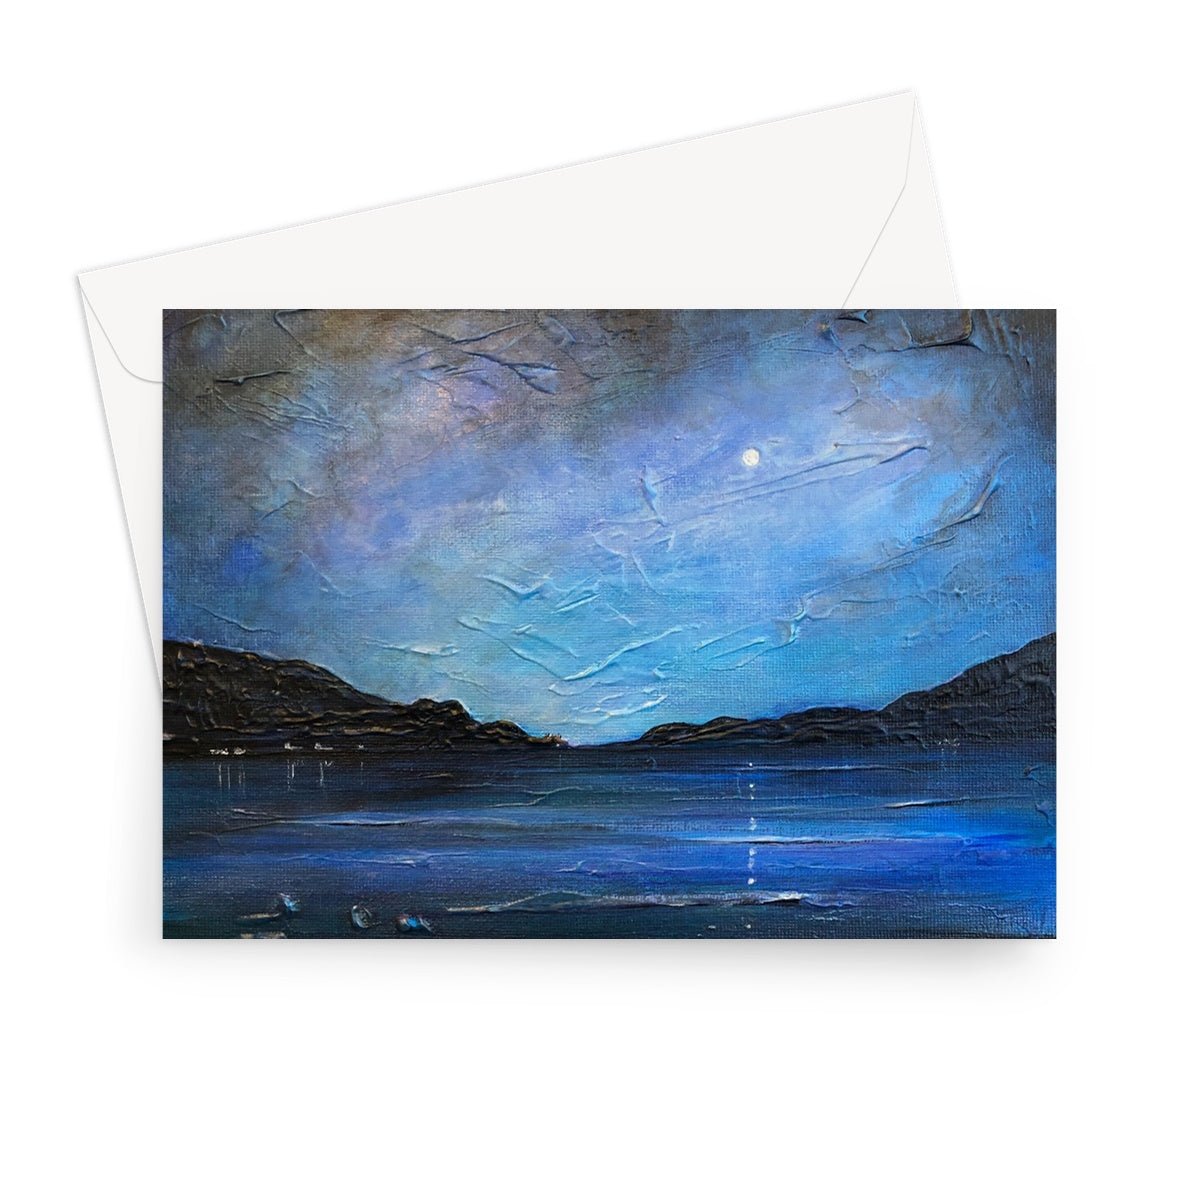 Loch Ness Moonlight Art Gifts Greeting Card-Greetings Cards-Scottish Lochs & Mountains Art Gallery-7"x5"-10 Cards-Paintings, Prints, Homeware, Art Gifts From Scotland By Scottish Artist Kevin Hunter